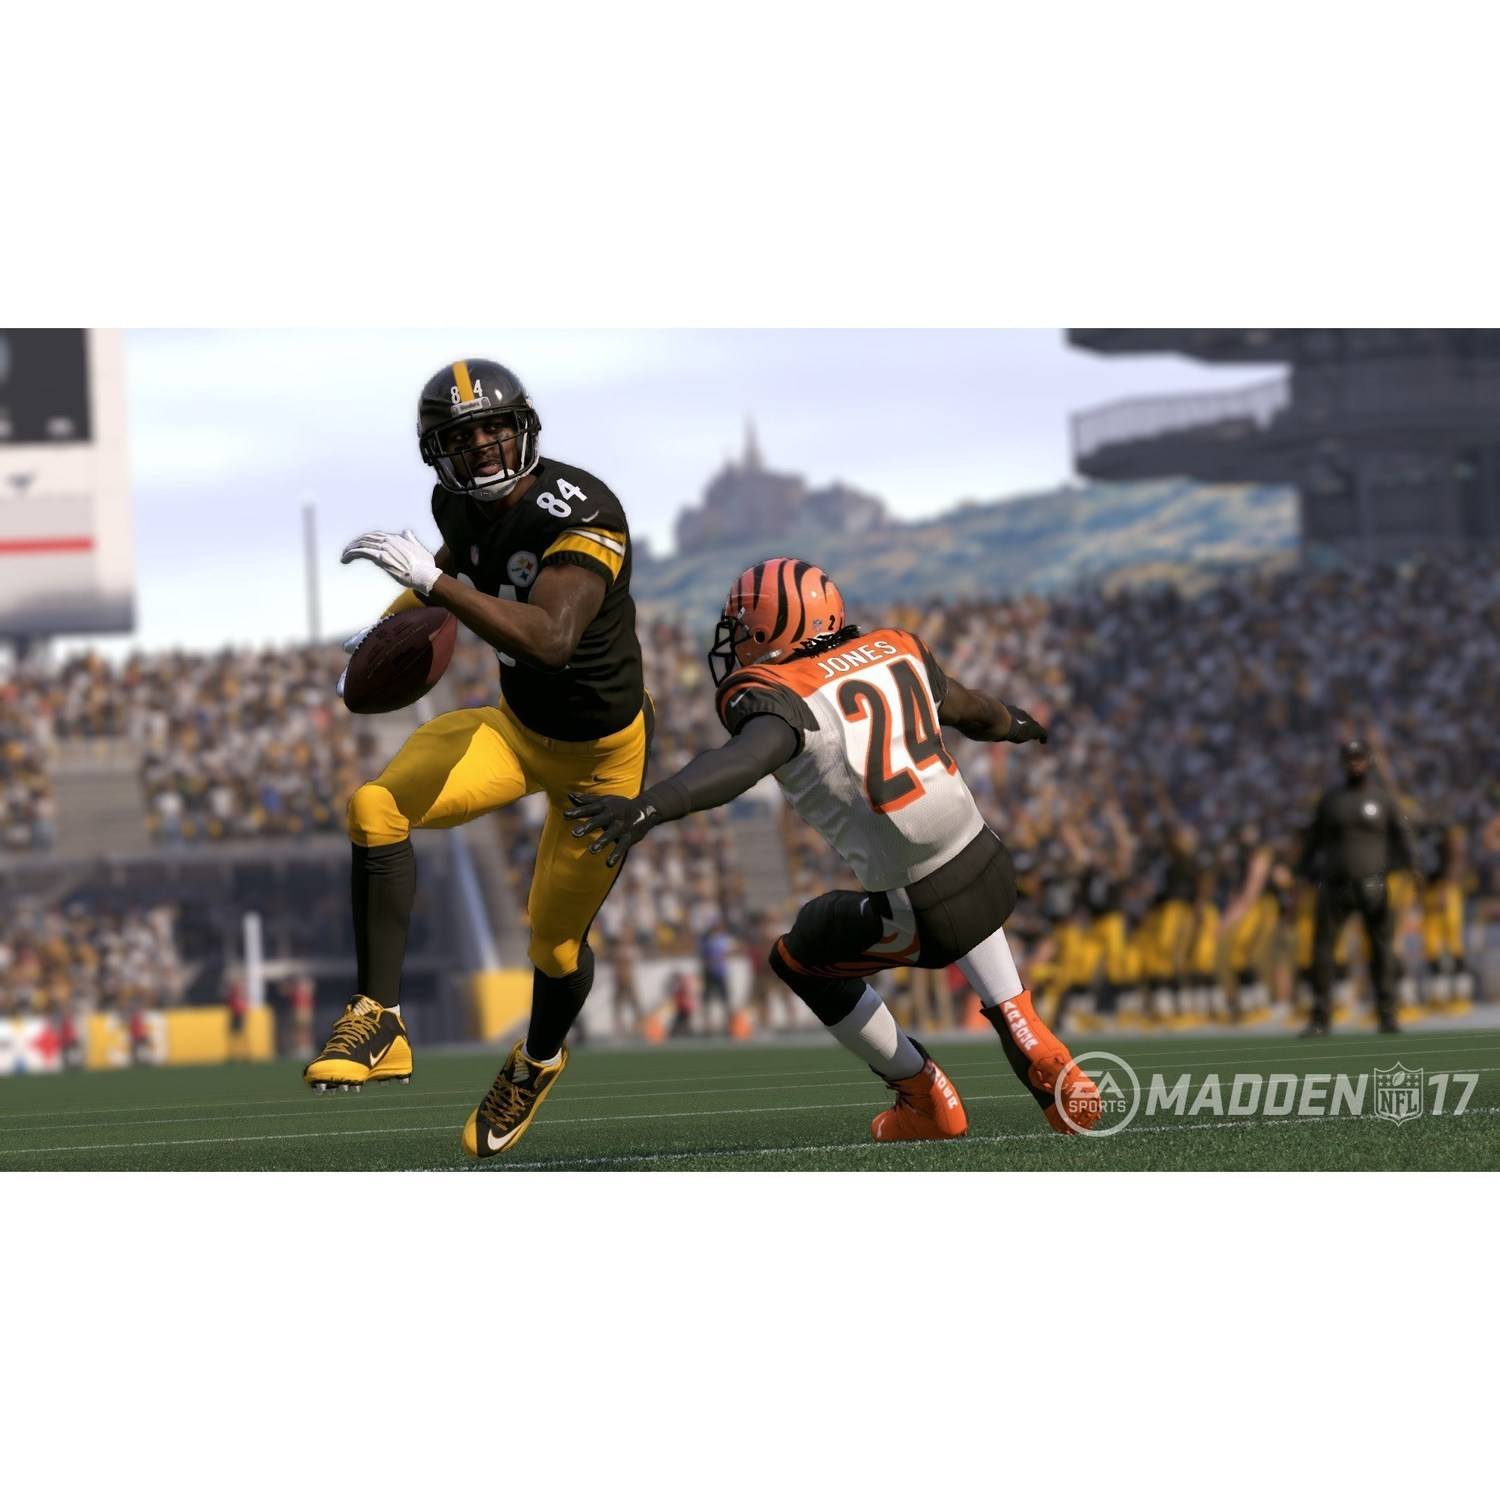 Madden NFL 17, Electronic Arts, PlayStation 4, 014633368574 - image 5 of 12